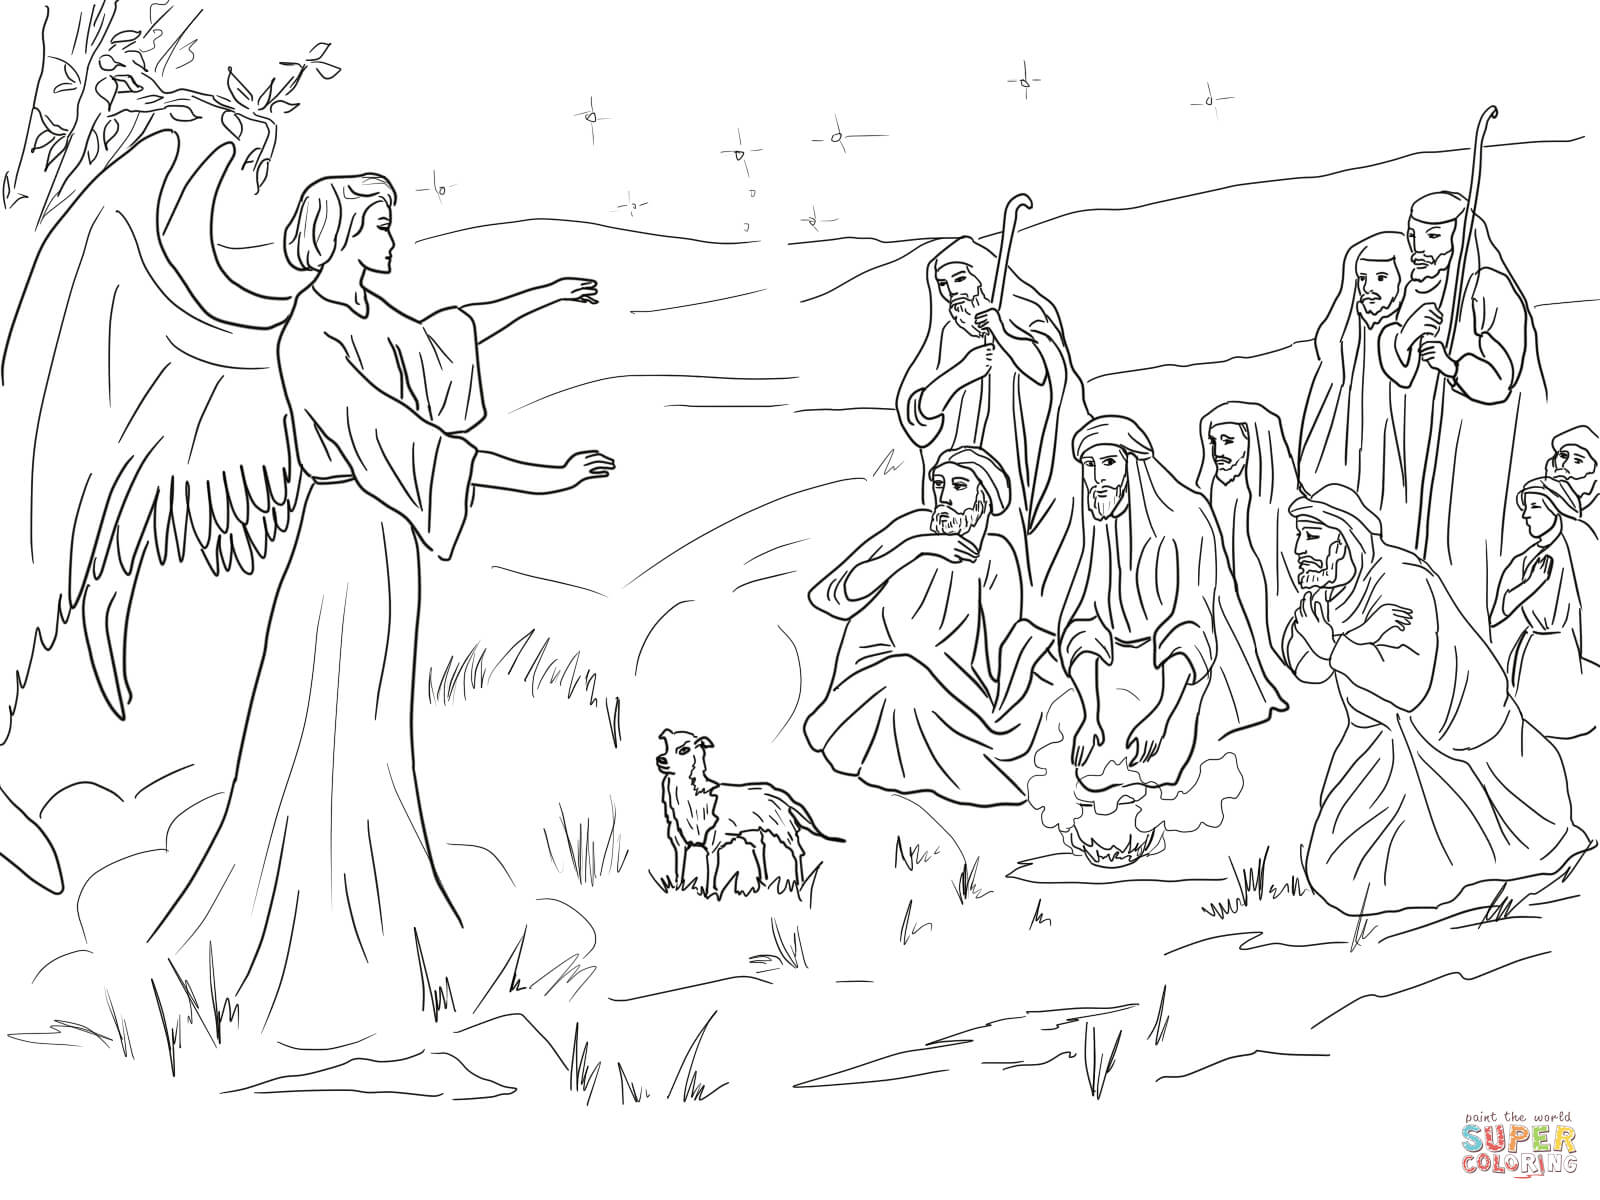 Angel Gabriel Announcing the Birth of Christ to Shepherds coloring ...